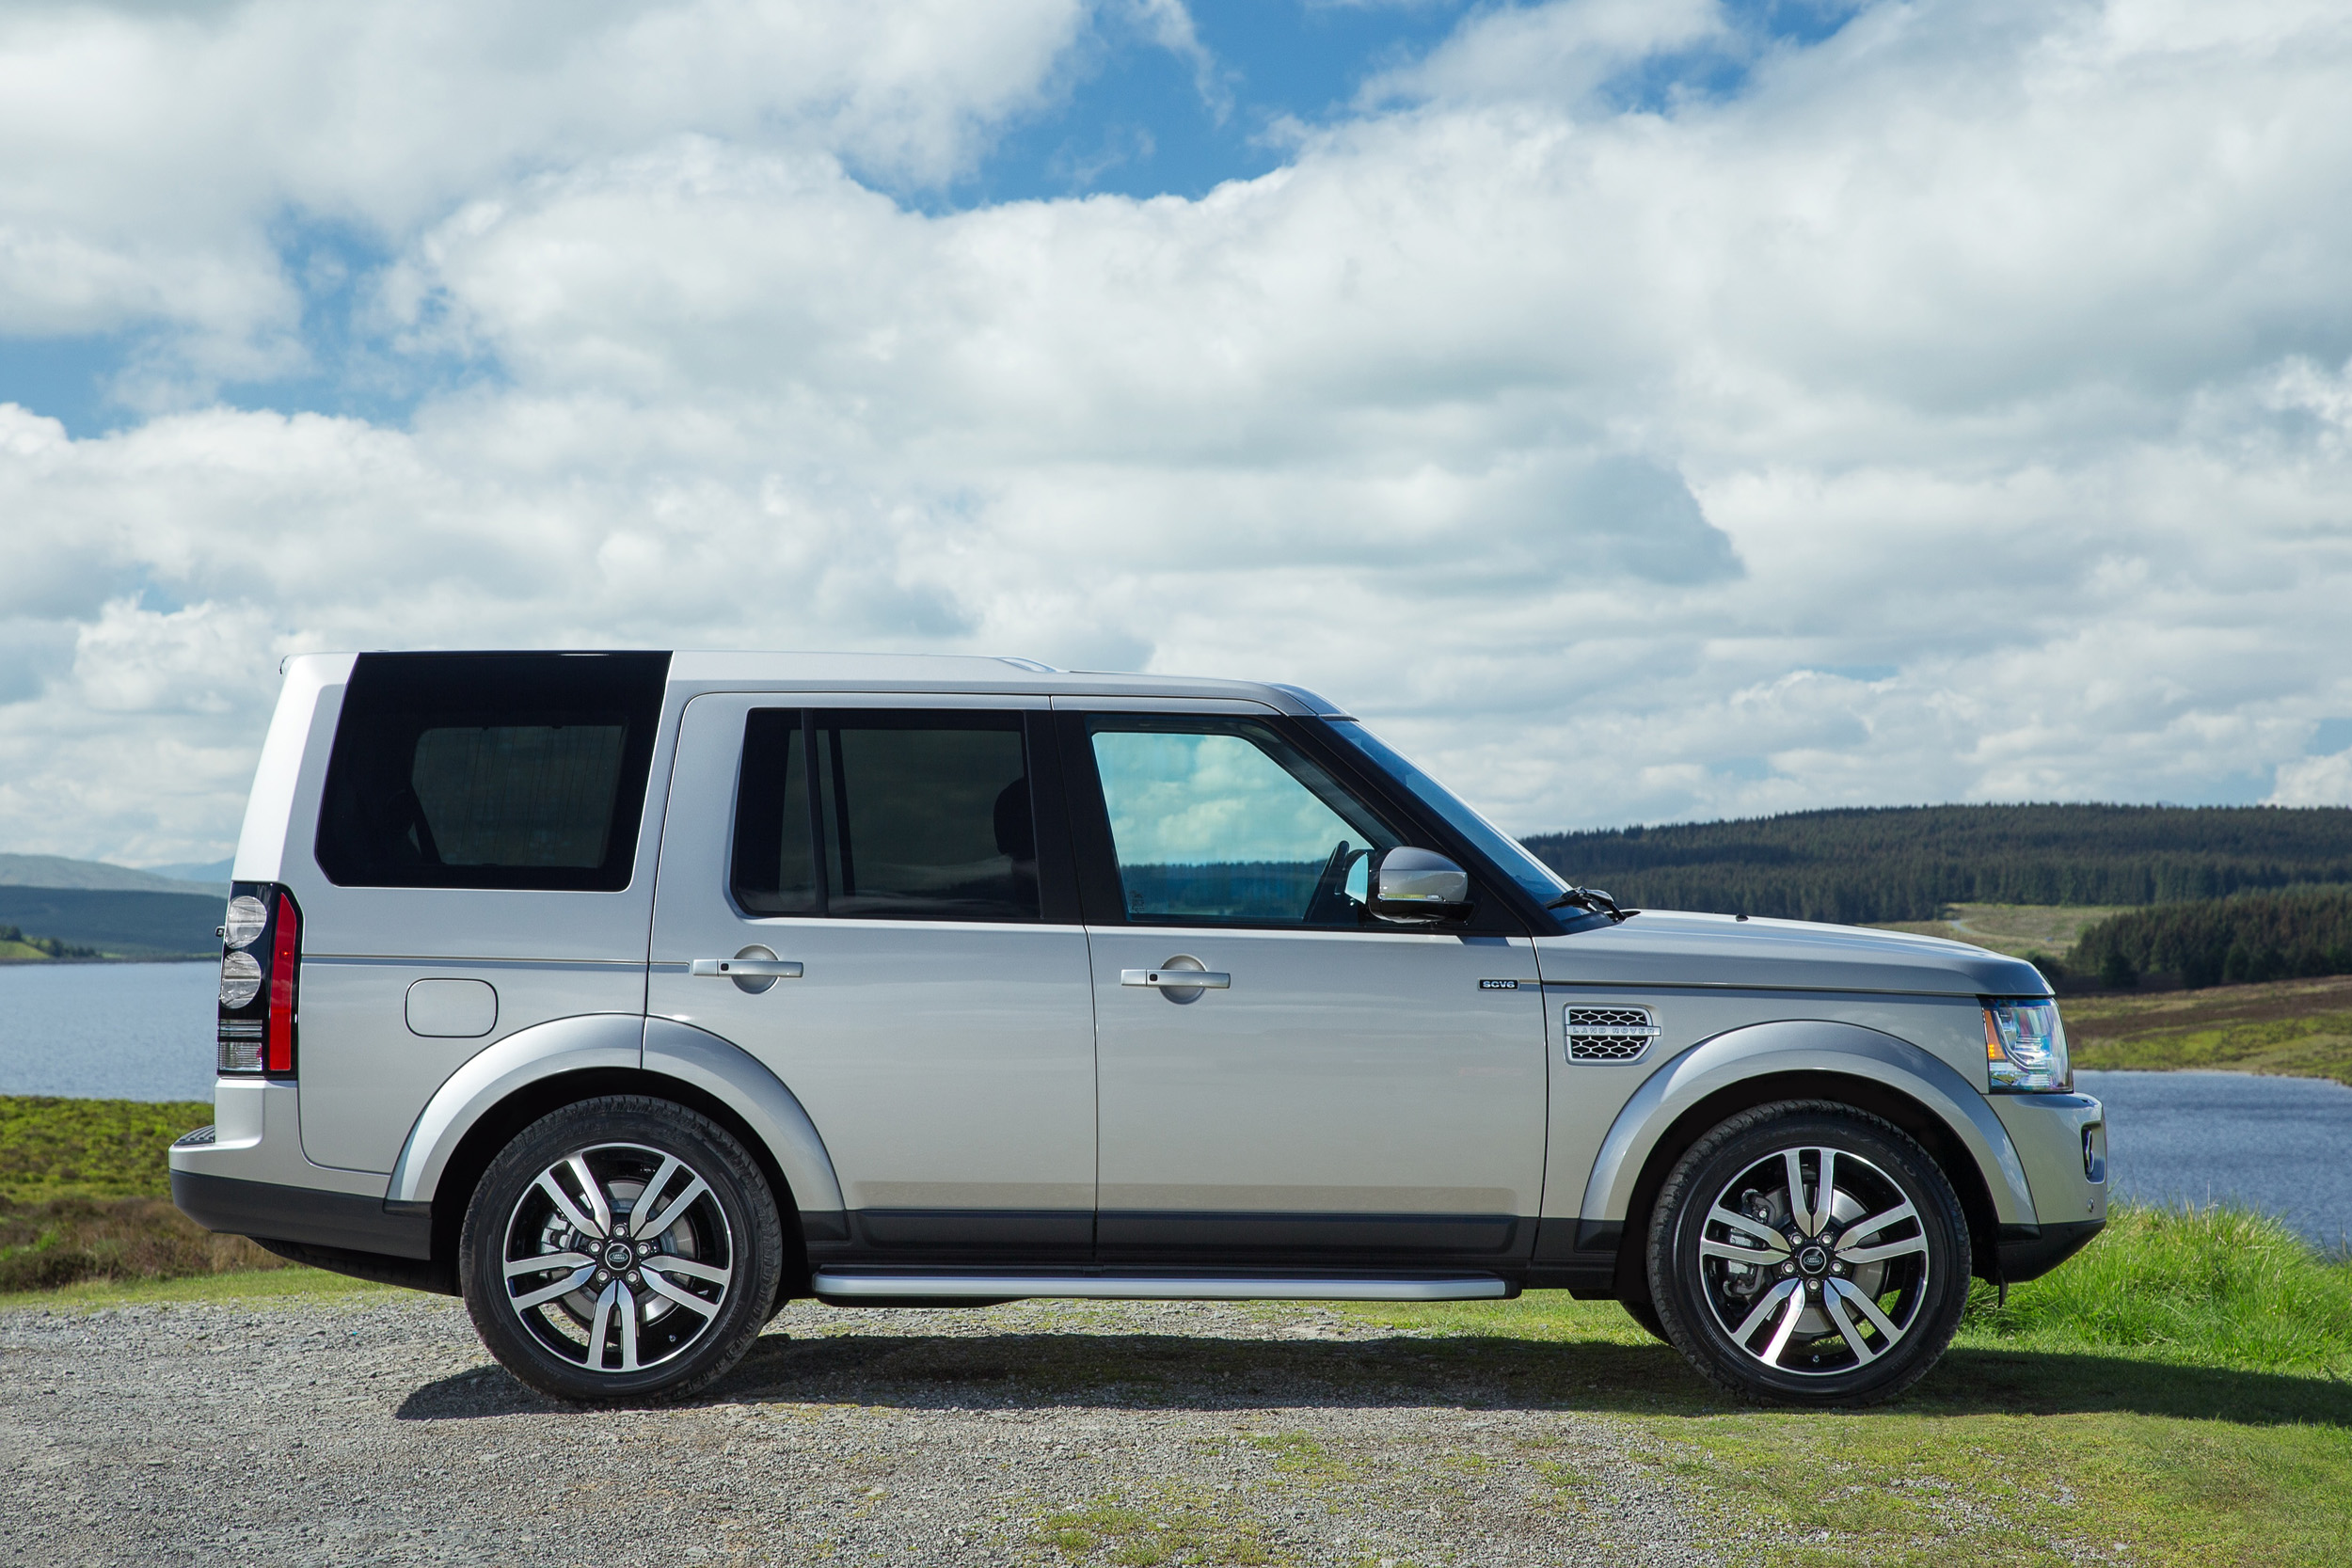 Дискавери 16. Land Rover Discovery 4. Ленд Ровер Дискавери 4 2015. Лэнд Ровер Дискавери, 2015. Land Rover Discovery lr4.